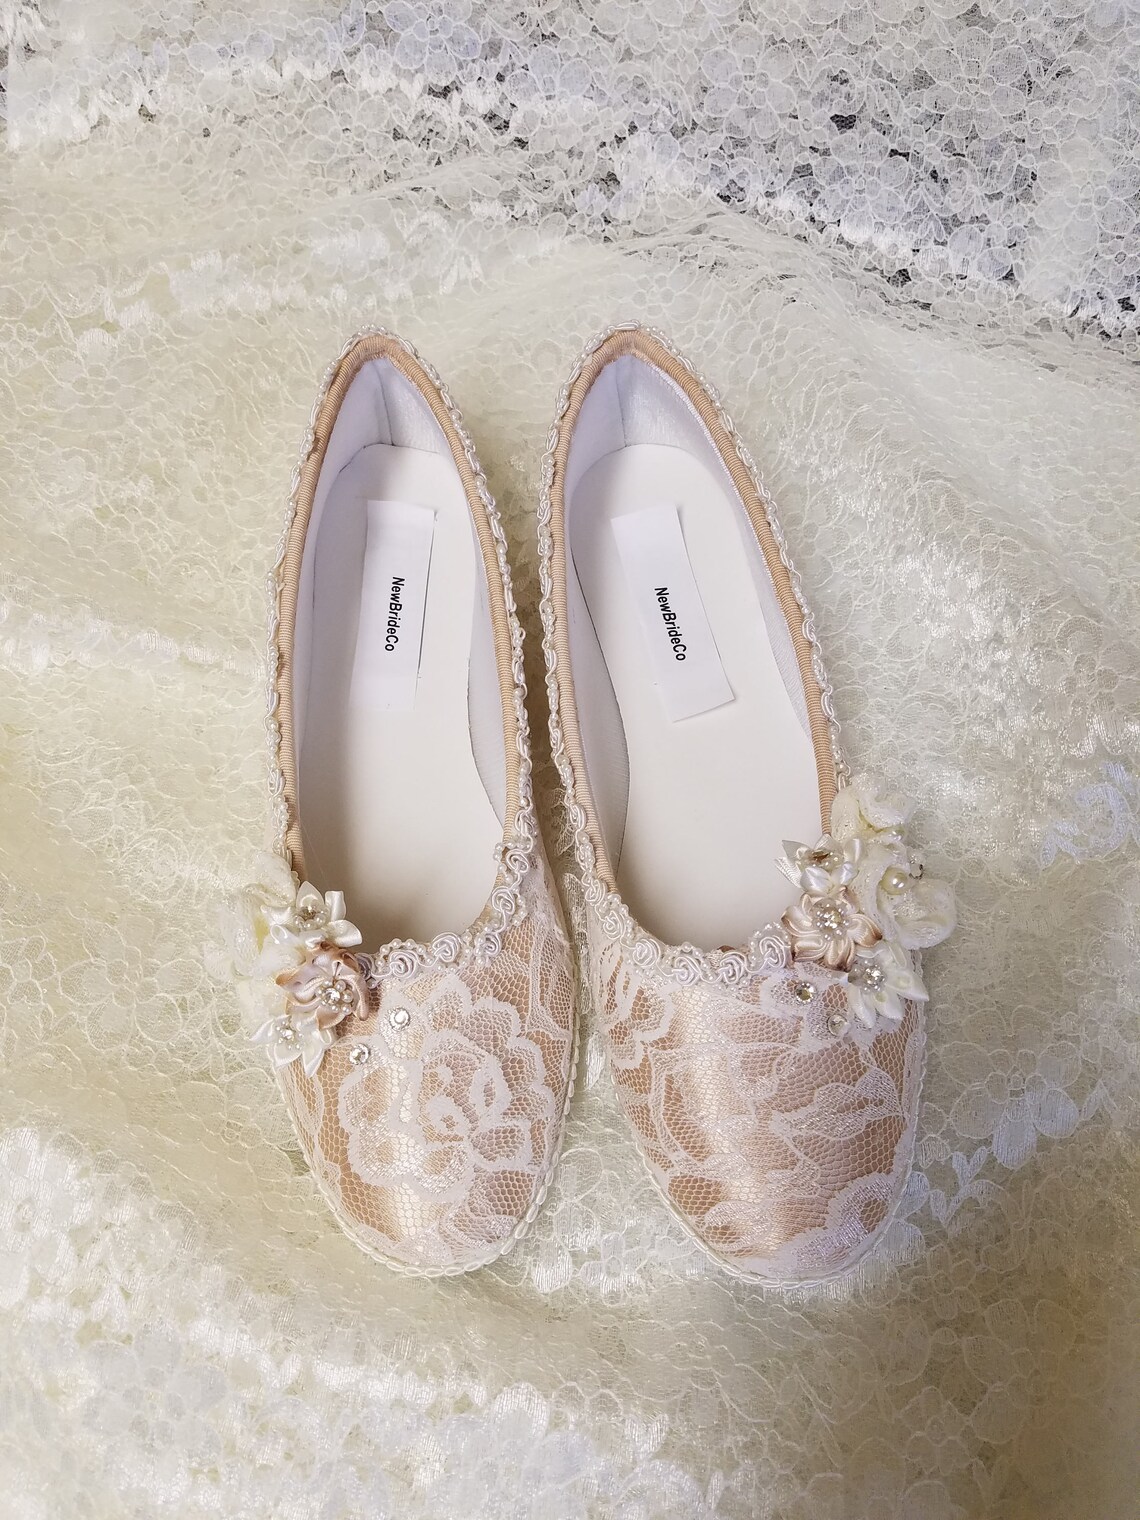 Champagne Wedding Flats Shoes Lace Vintage Modern | Etsy